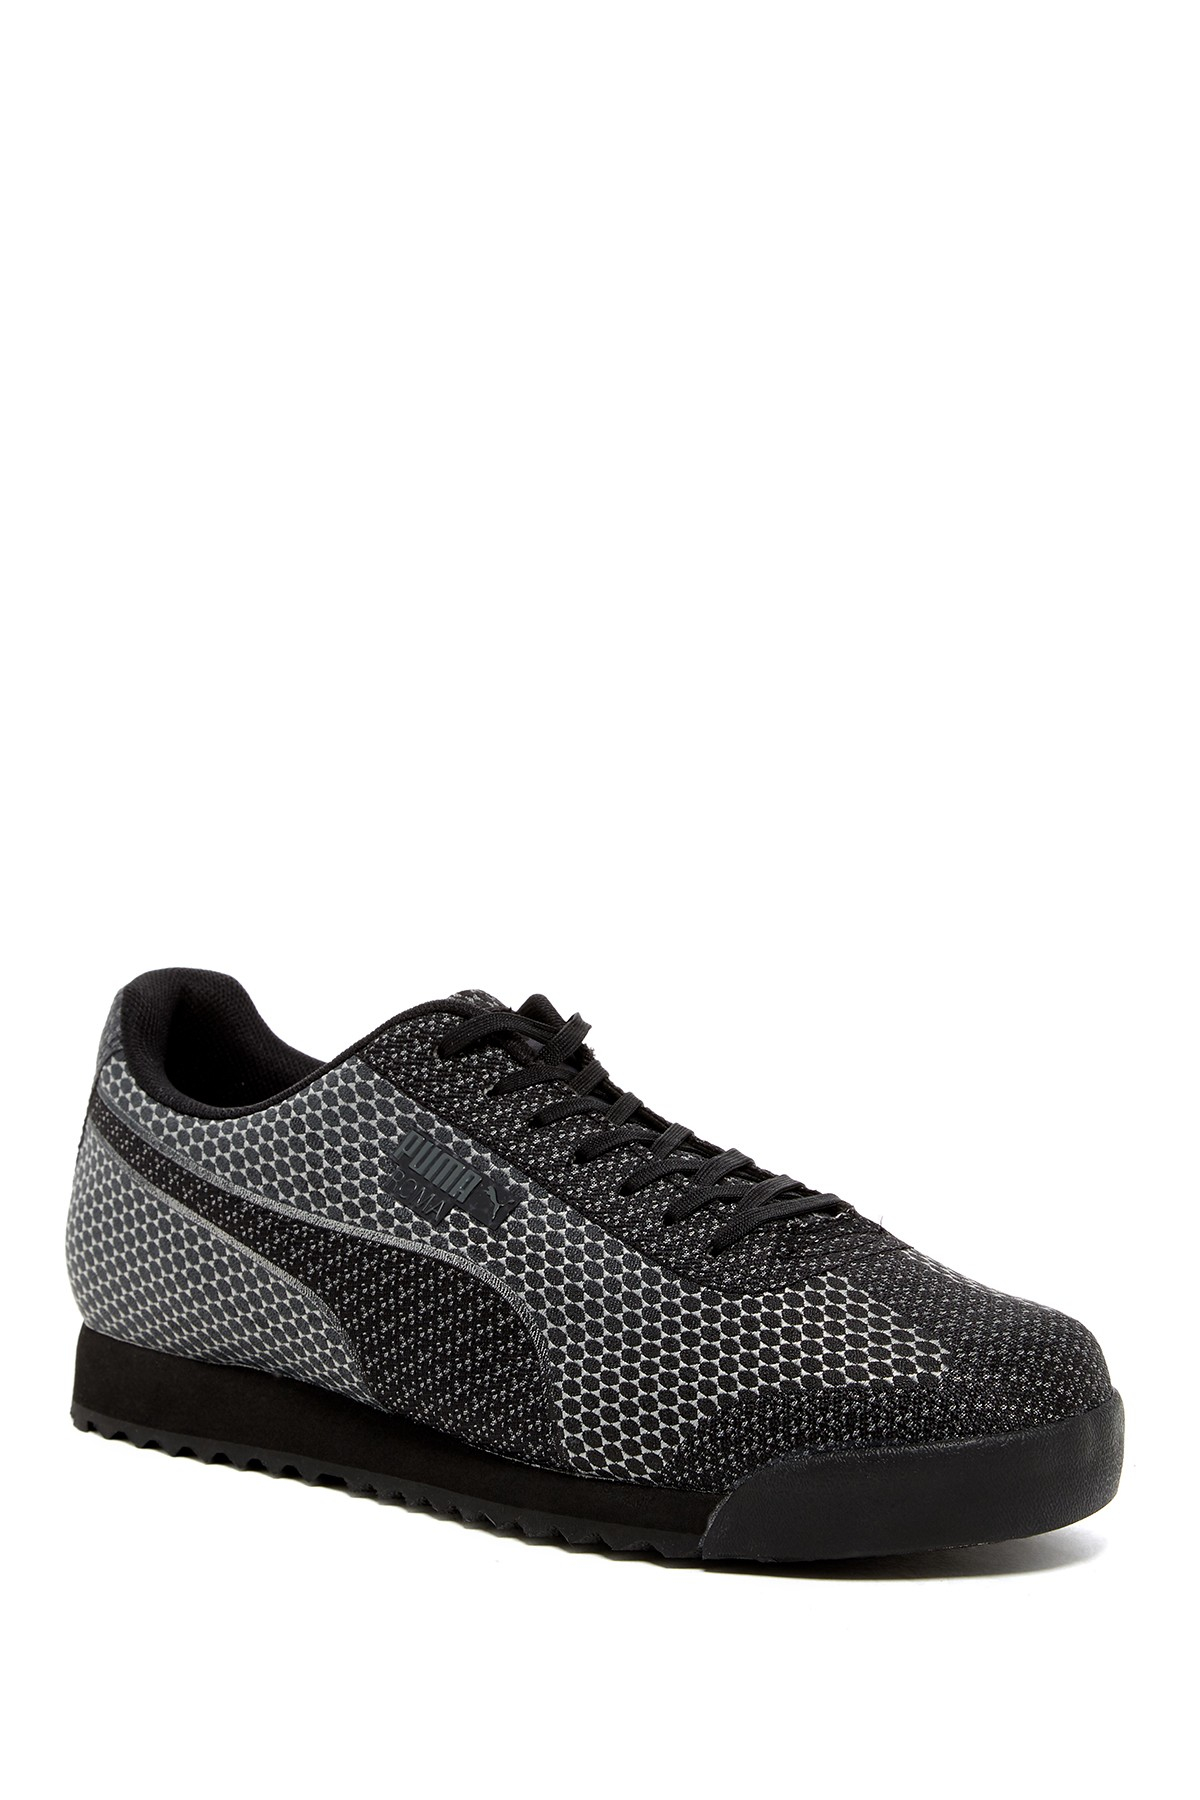 PUMA Synthetic Roma Woven Mesh Sneaker in Black for Men | Lyst